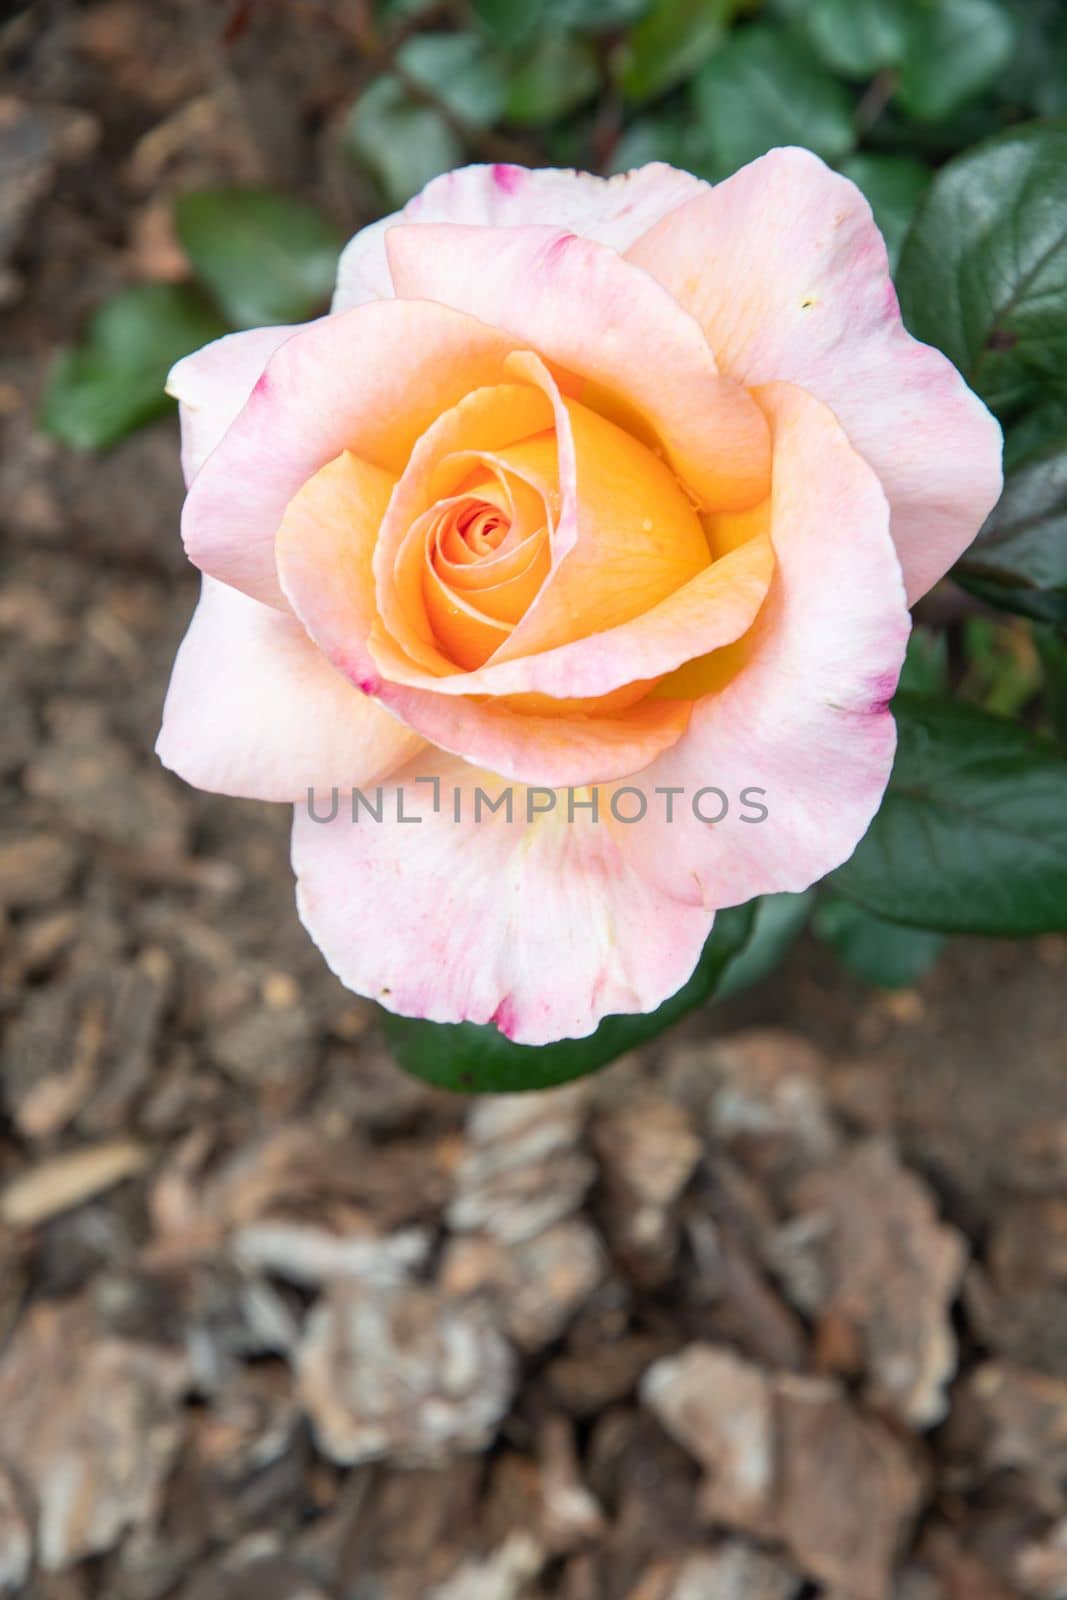 beautiful big creamy pink rose behind in the garden close-up flower portrait. High quality photo